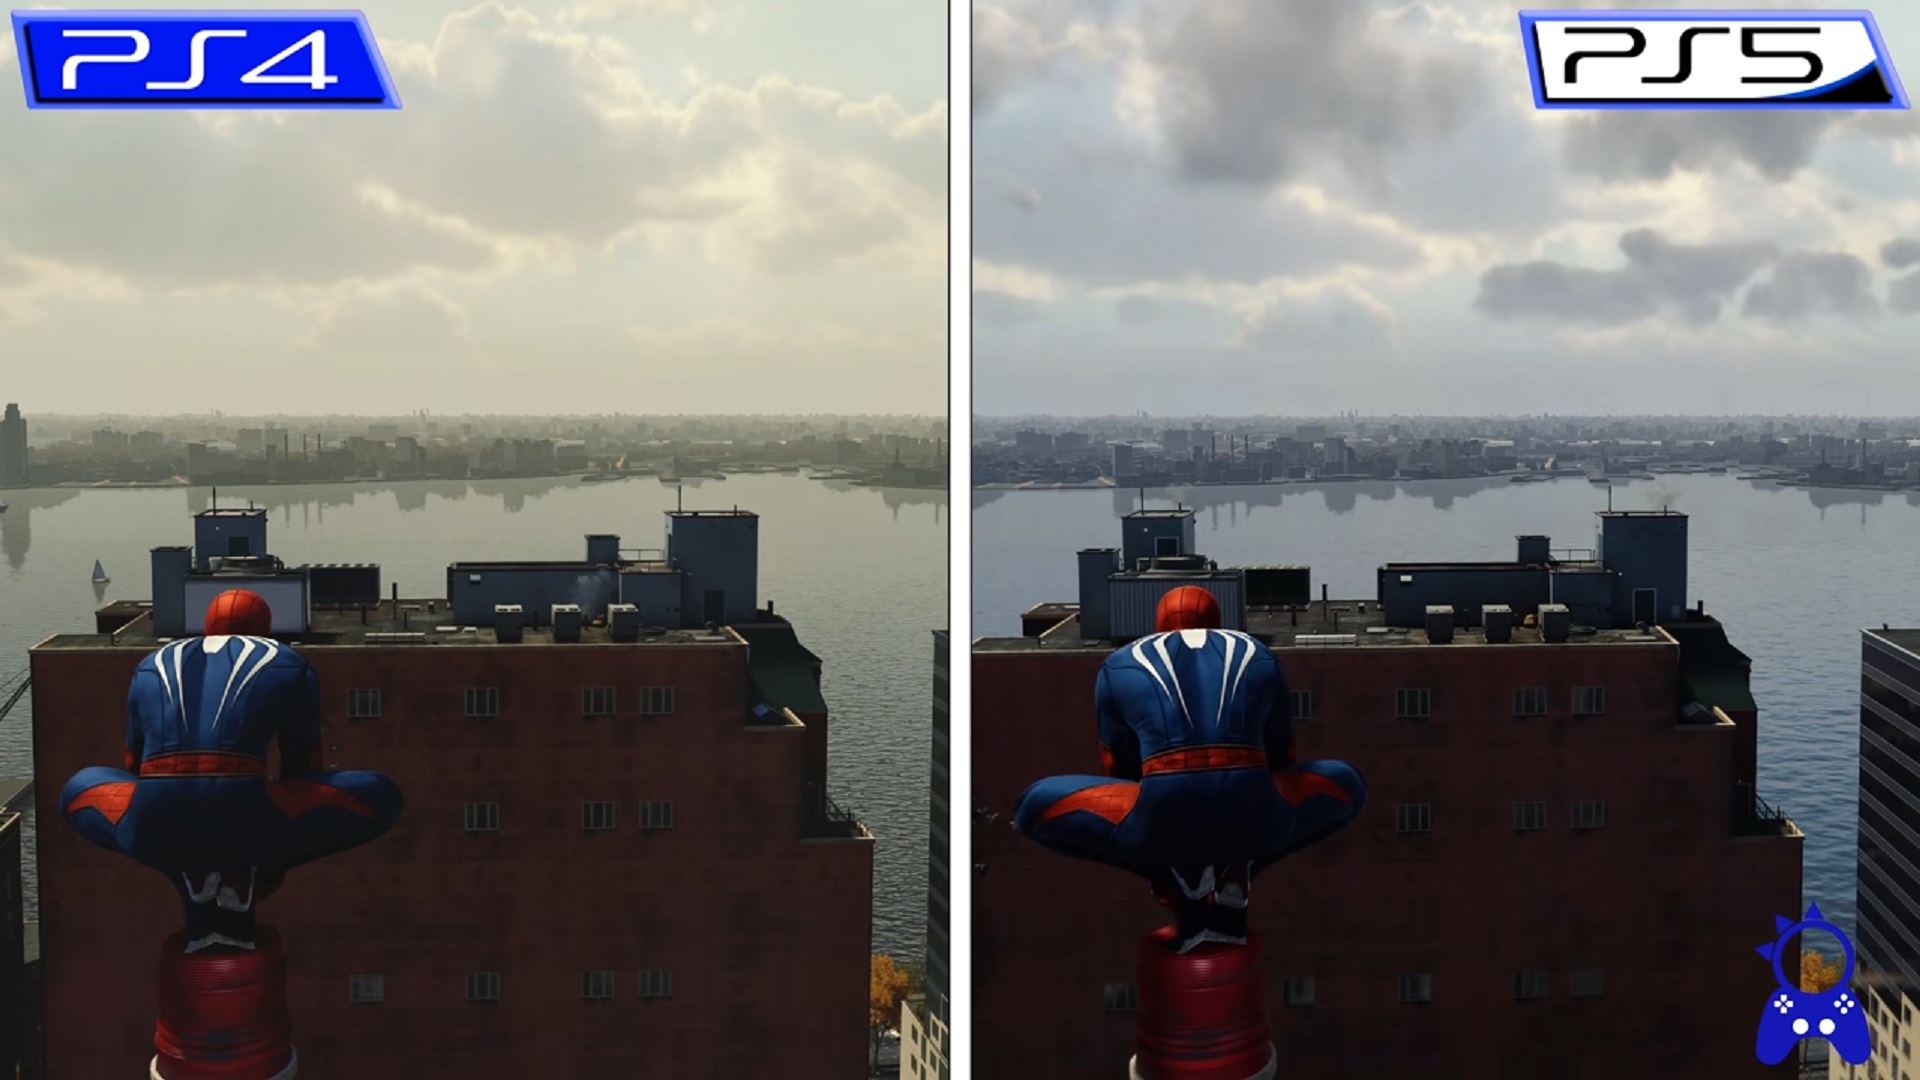 Marvel S Spider Man Comparison Video Gives You A Look At The Jump From Ps4 To Ps5 Gamesradar